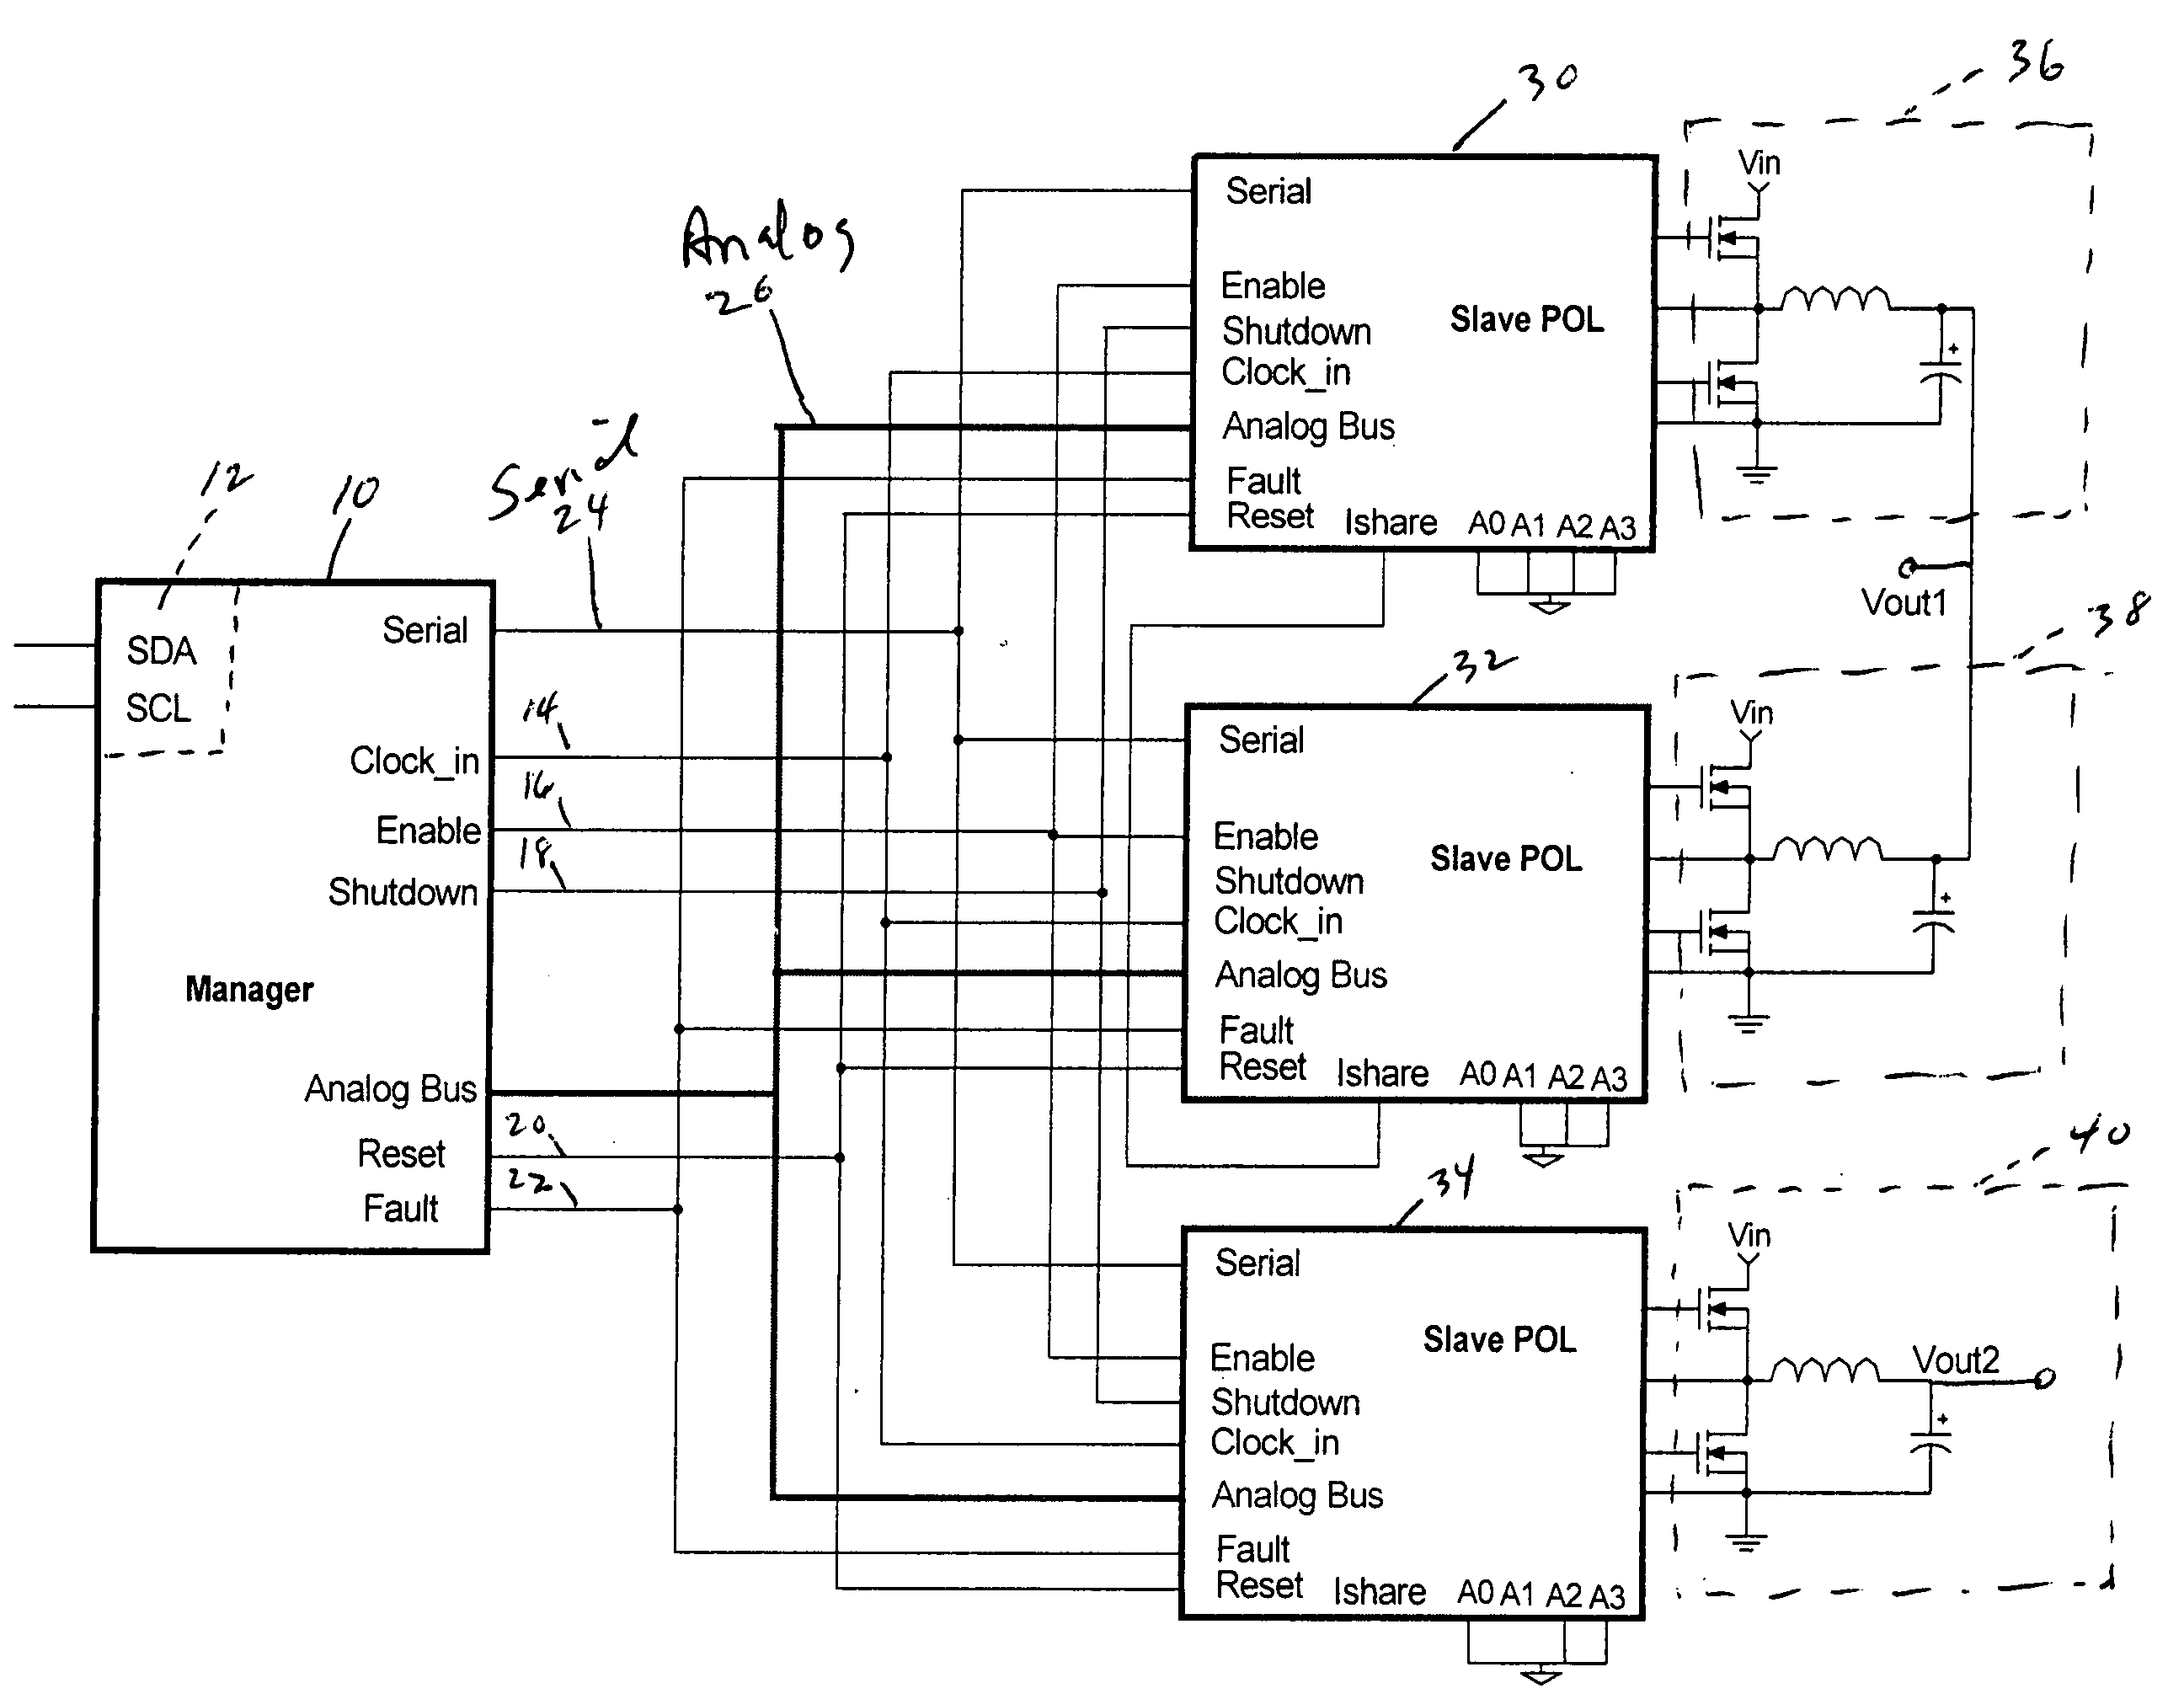 Pol system architecture with analog bus